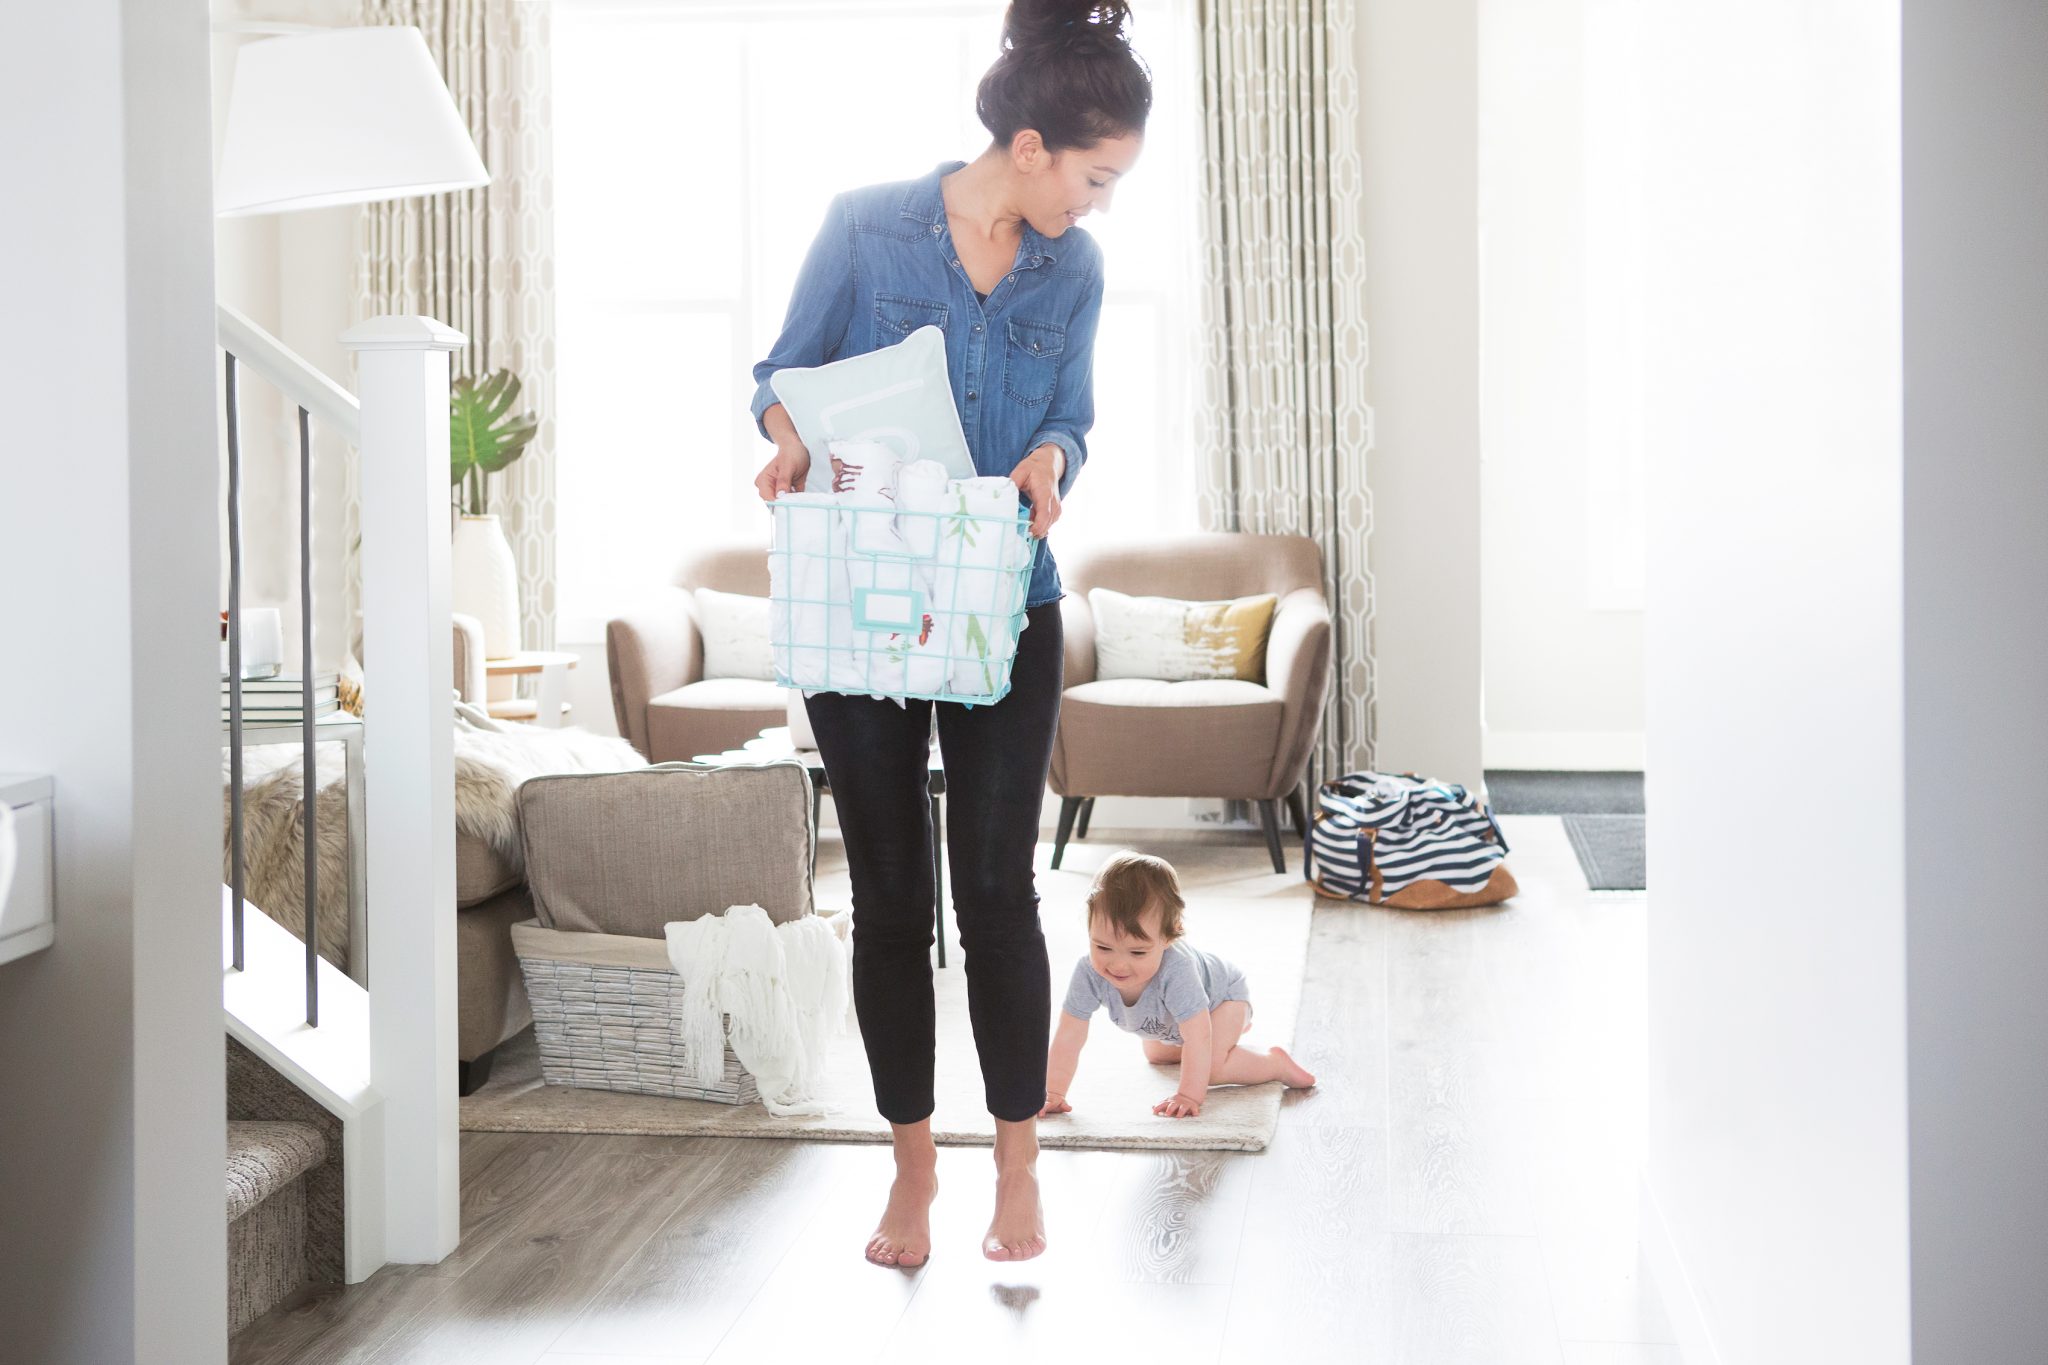 Stay at home mom doing laundry with crawling baby in tow. Many moms find that it's cheaper to be a stay at home mom, and it isn't just ditching daycare that saves you money.